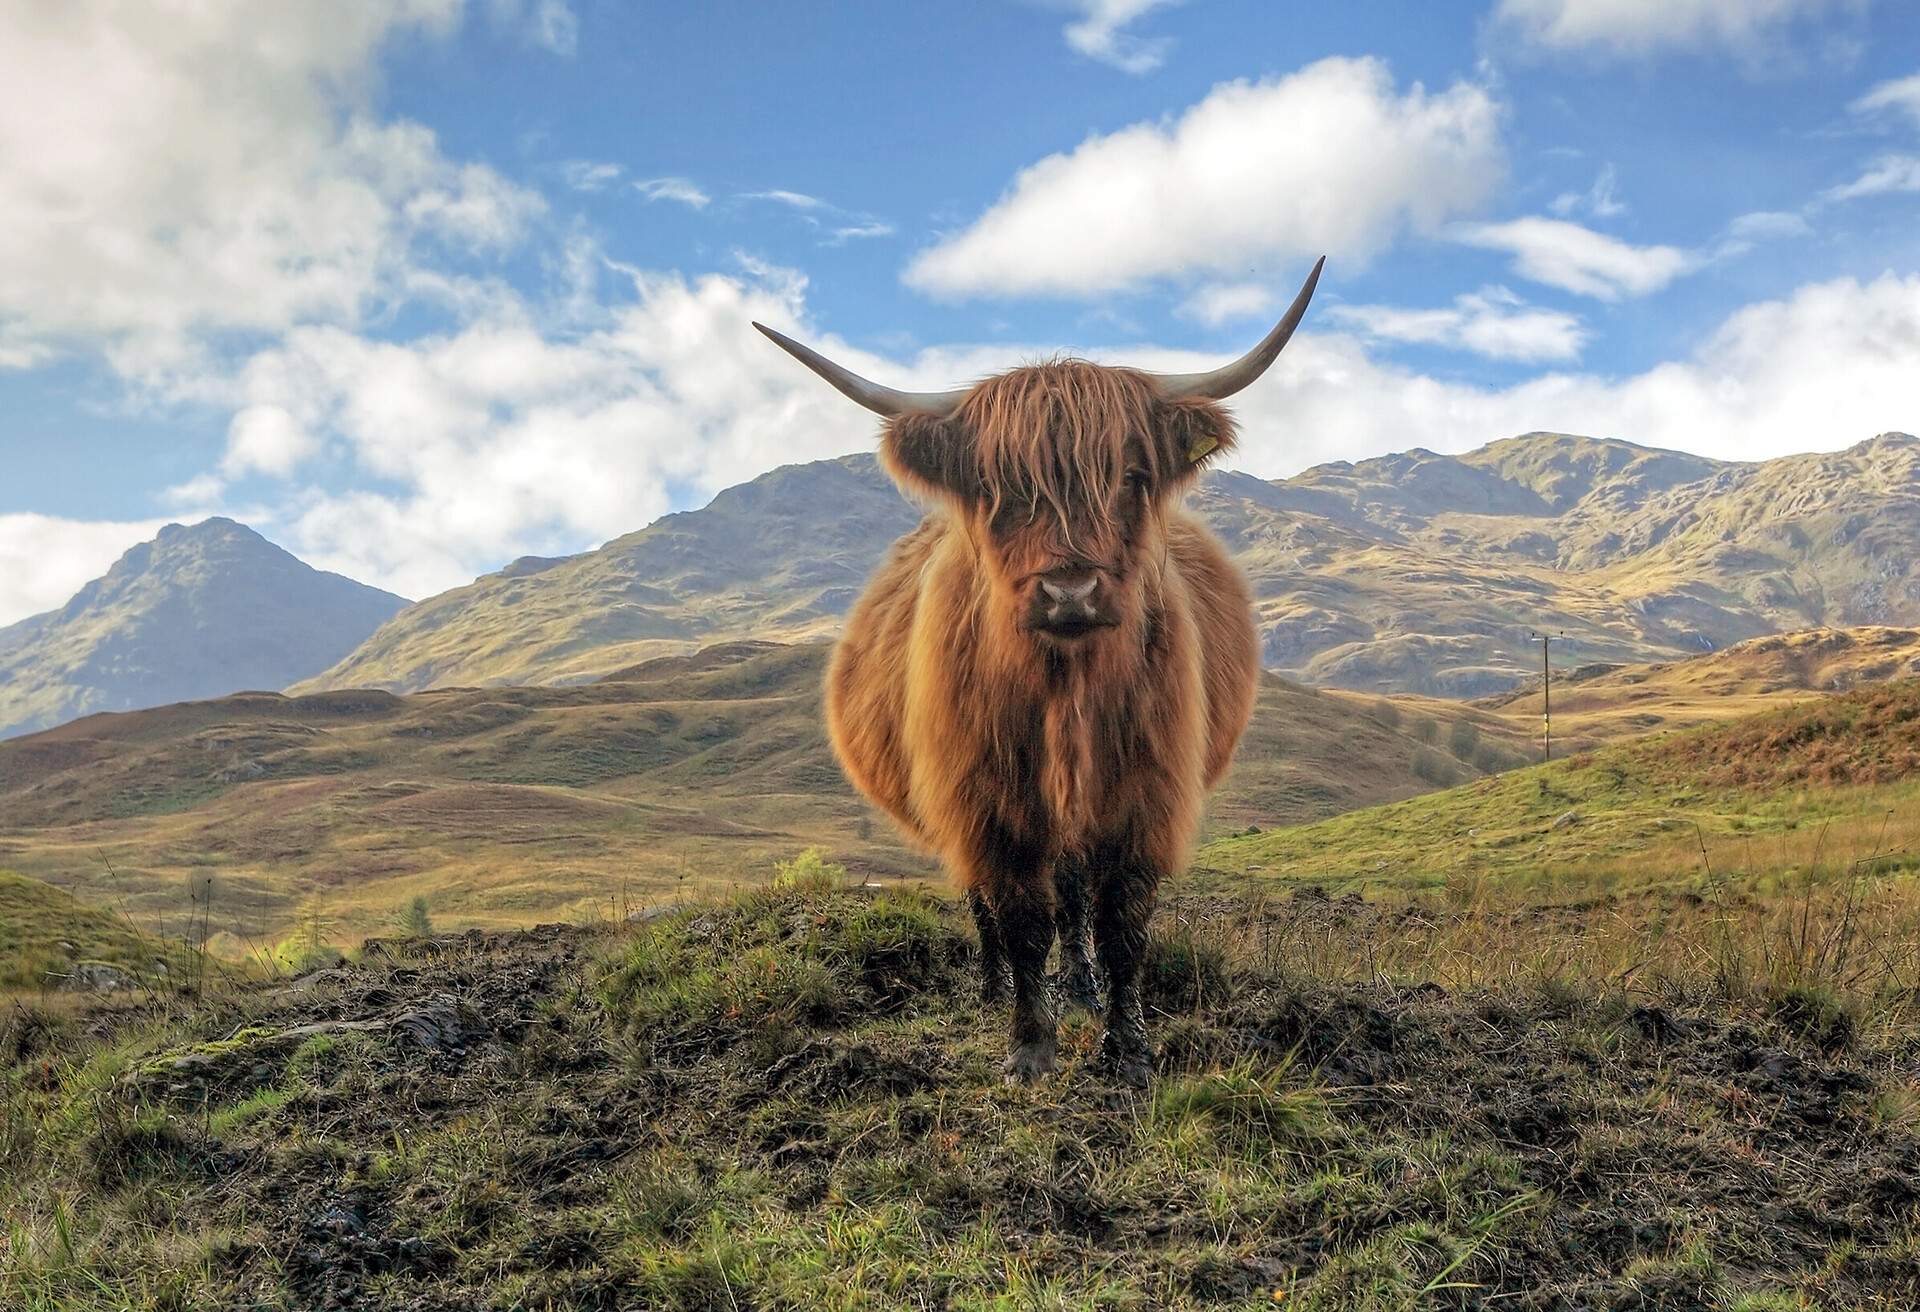 A highland cow on a rugged grassy hill with a view of steep rocky mountains.